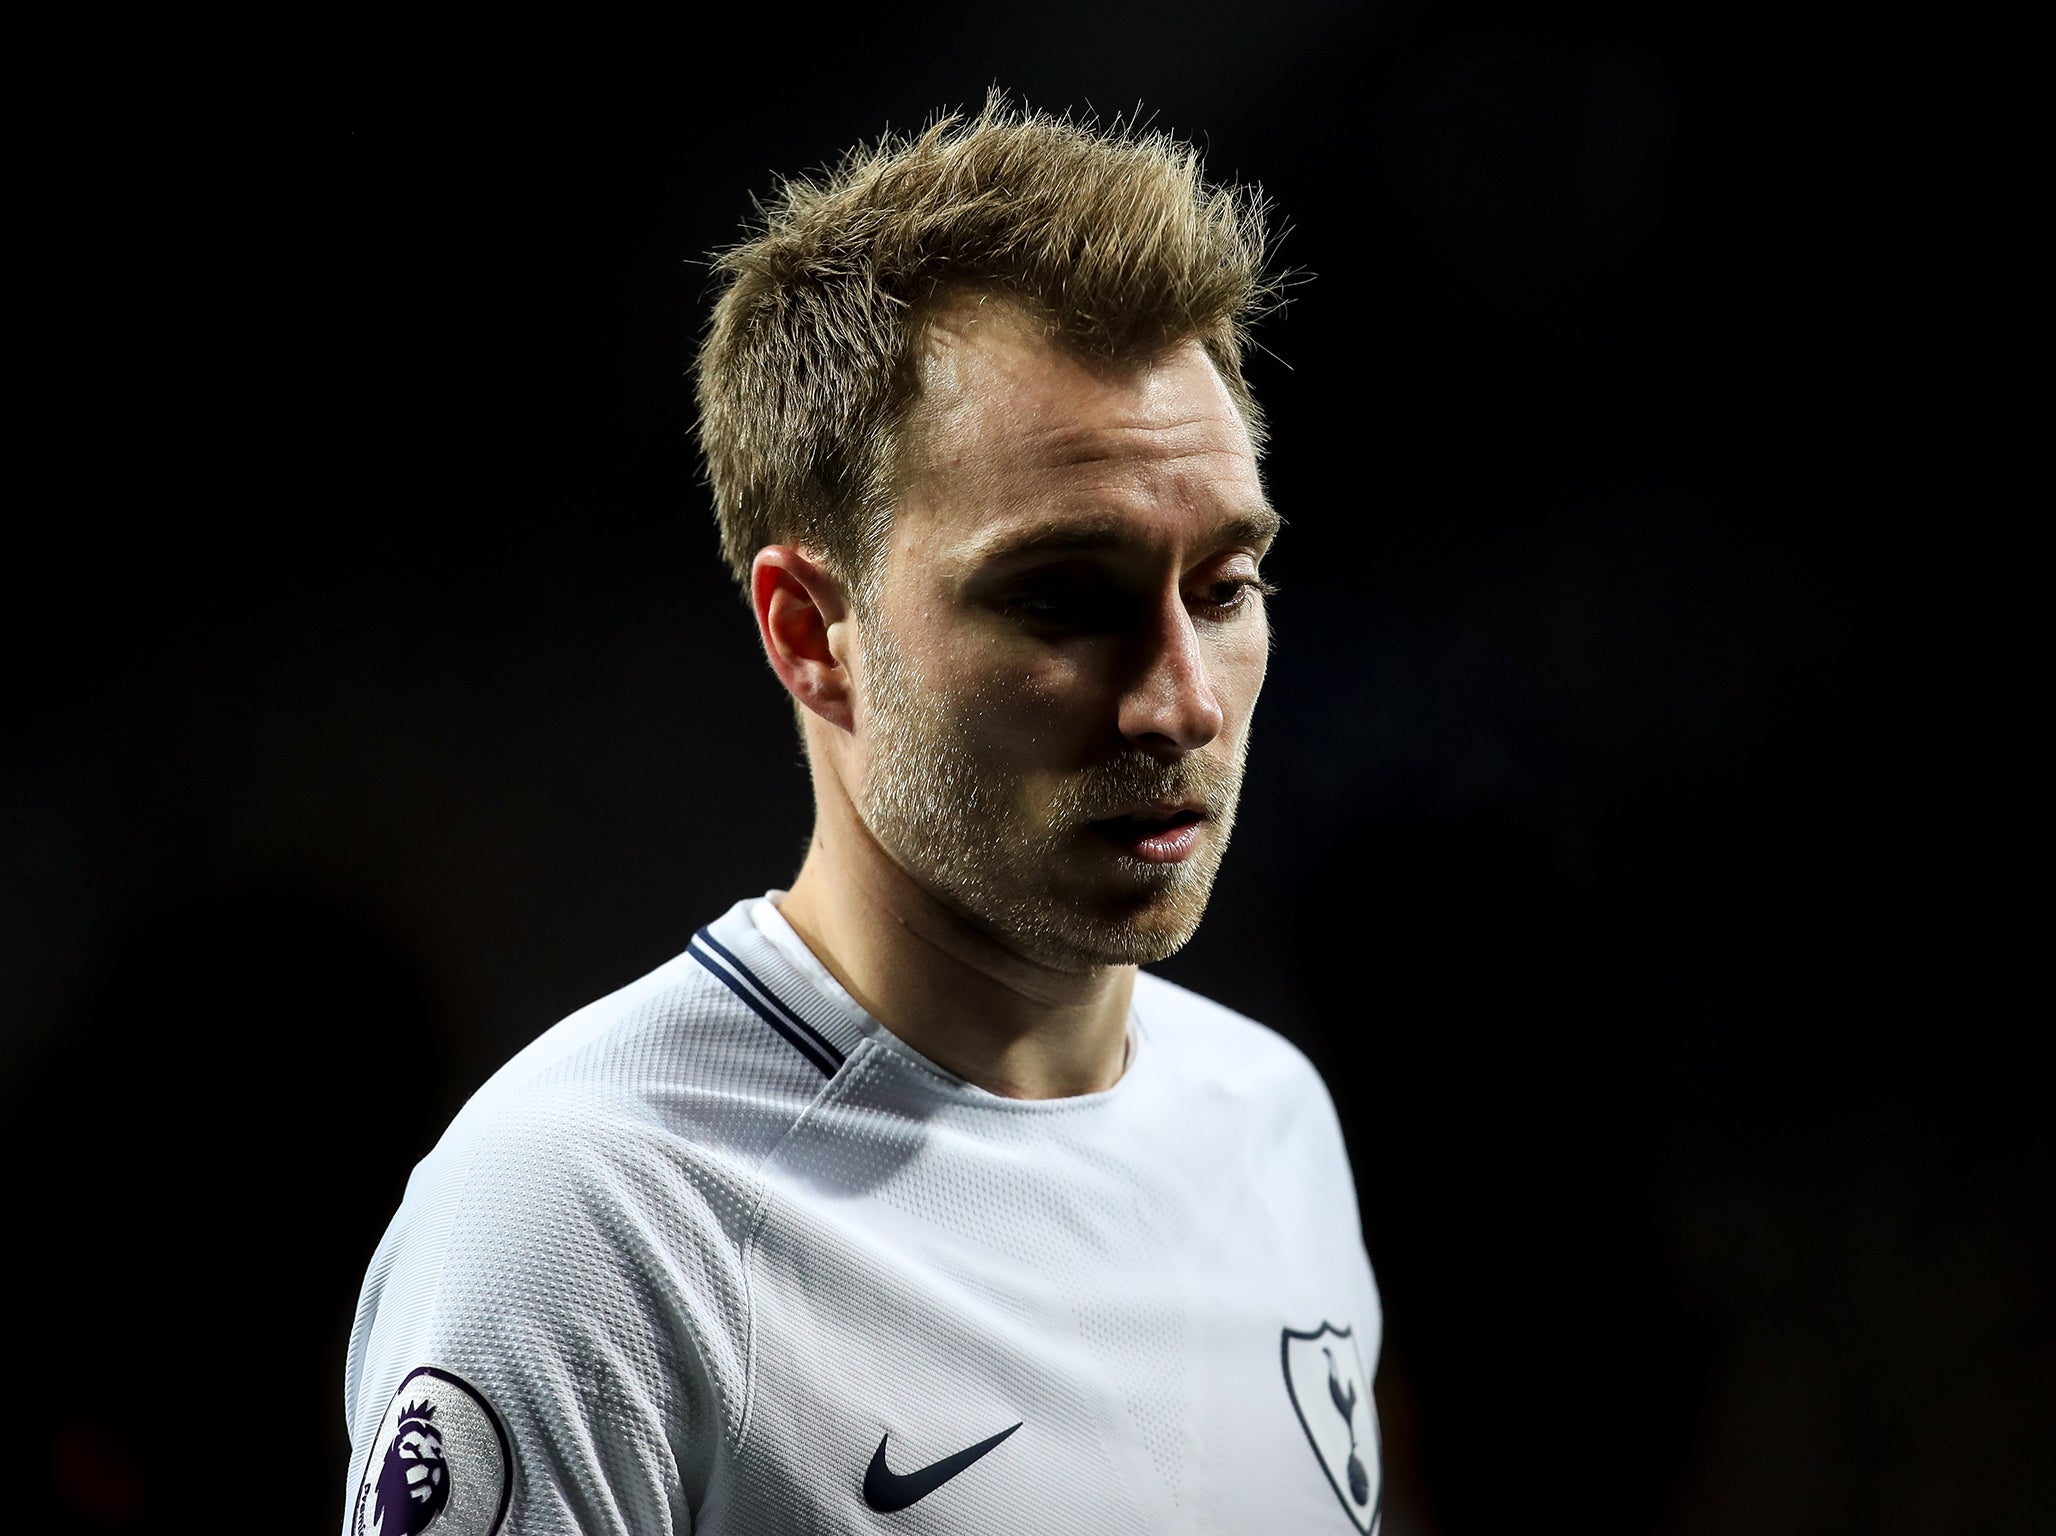 Christian Eriksen was sorely missed as Spurs drew with Southampton